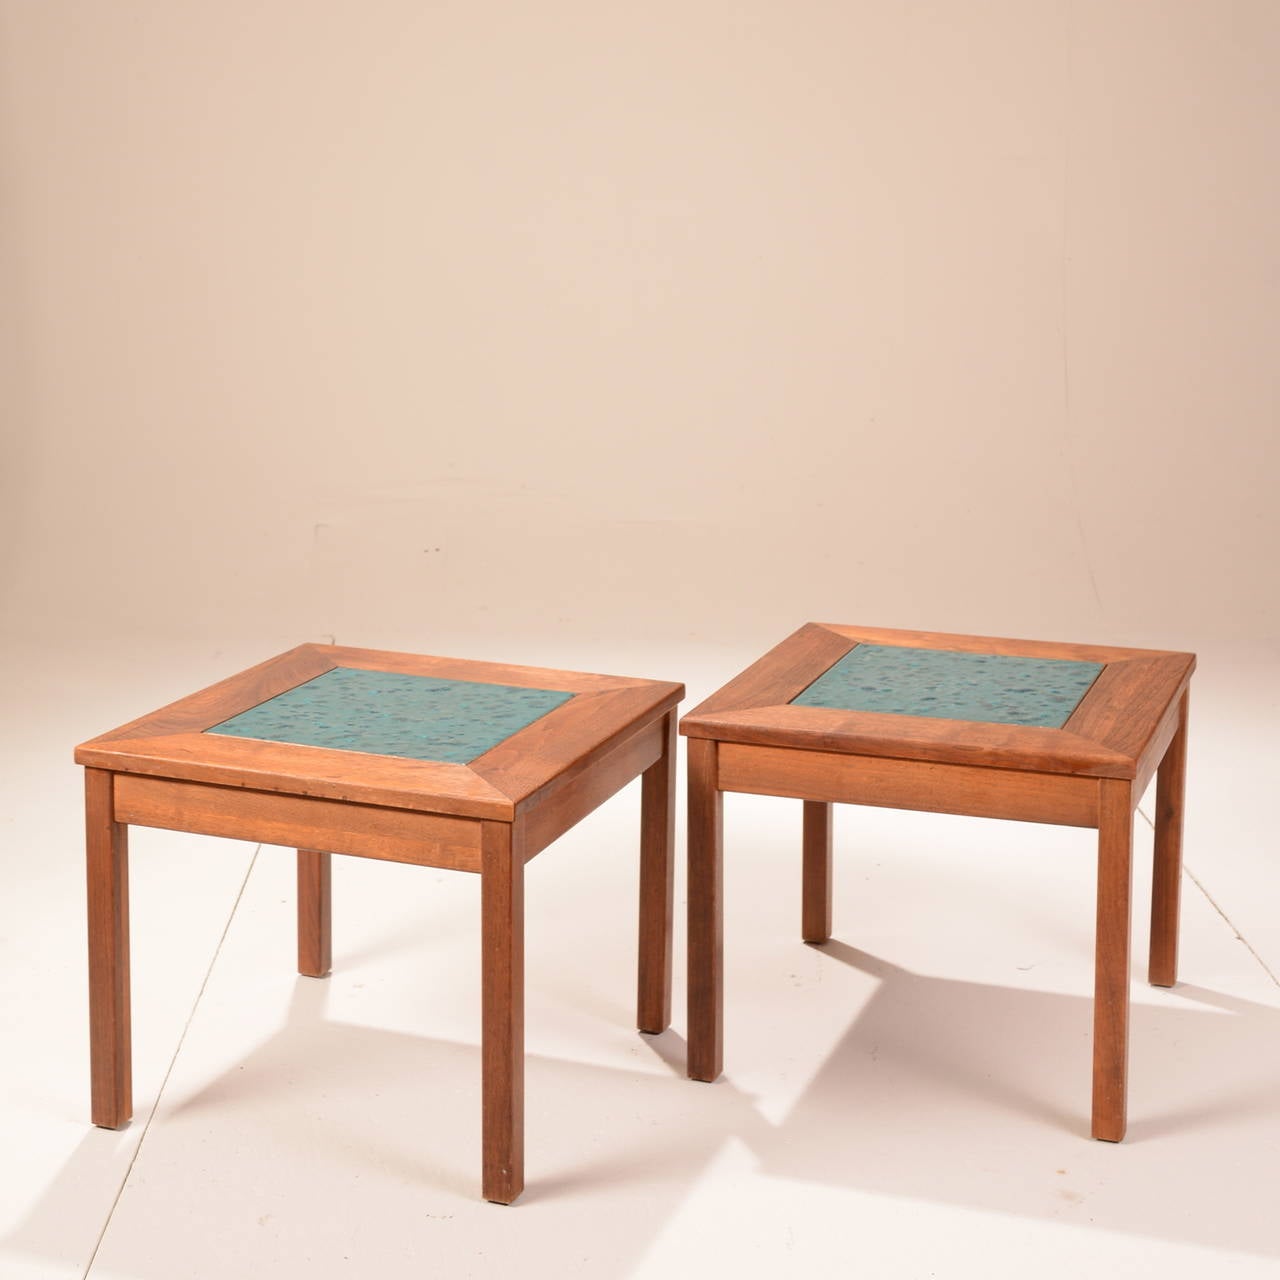 Set of walnut with enamel copper tile tables titled ‘Constellation’ produced by high-end Californian furniture manufacturer, Brown Saltman. These two solid walnut wood tables each feature a unique copper enamel tile inlay in excellent condition.